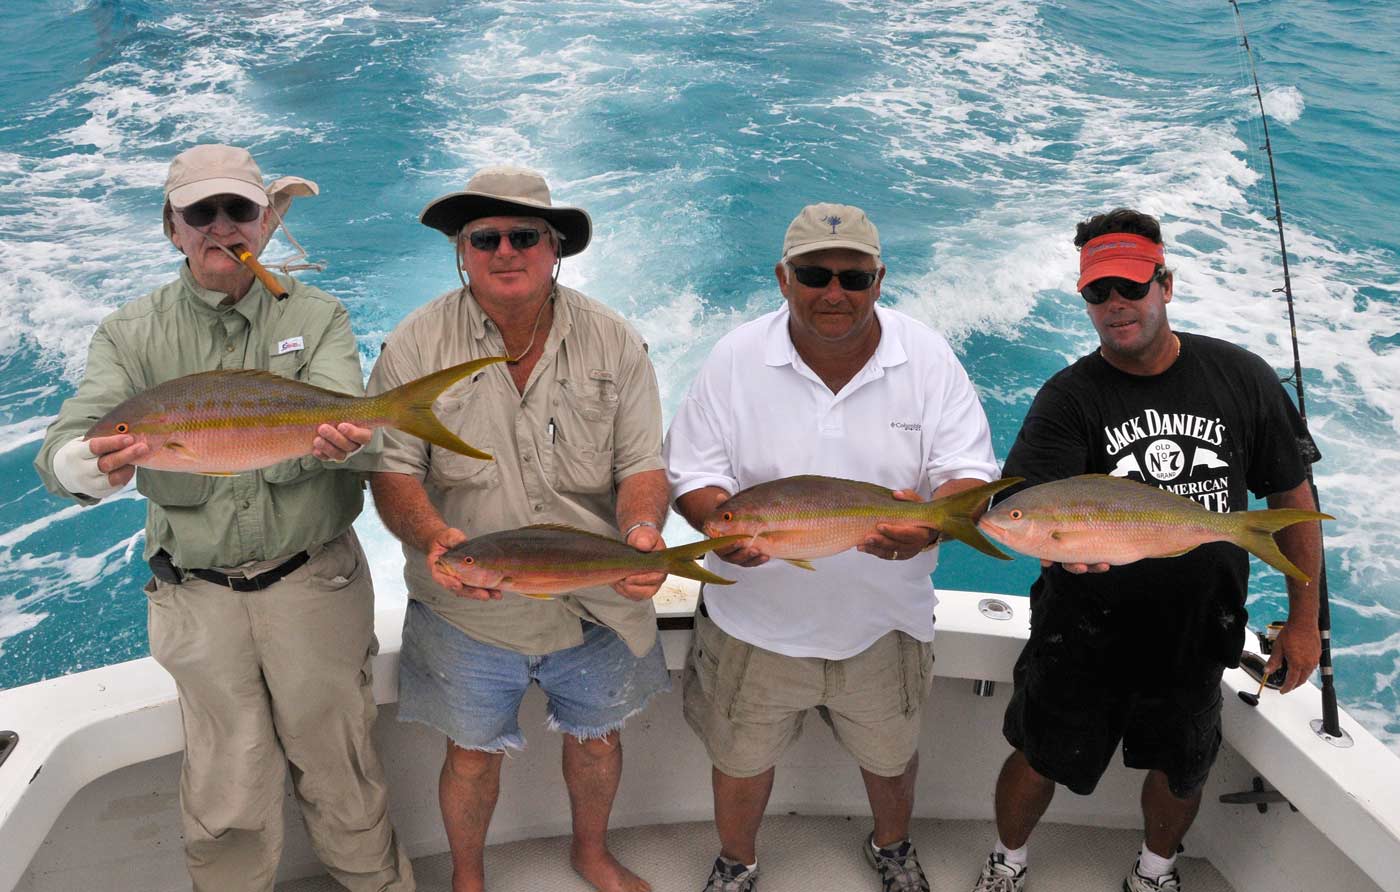 Yellowtail snapper don't get much larger than these!